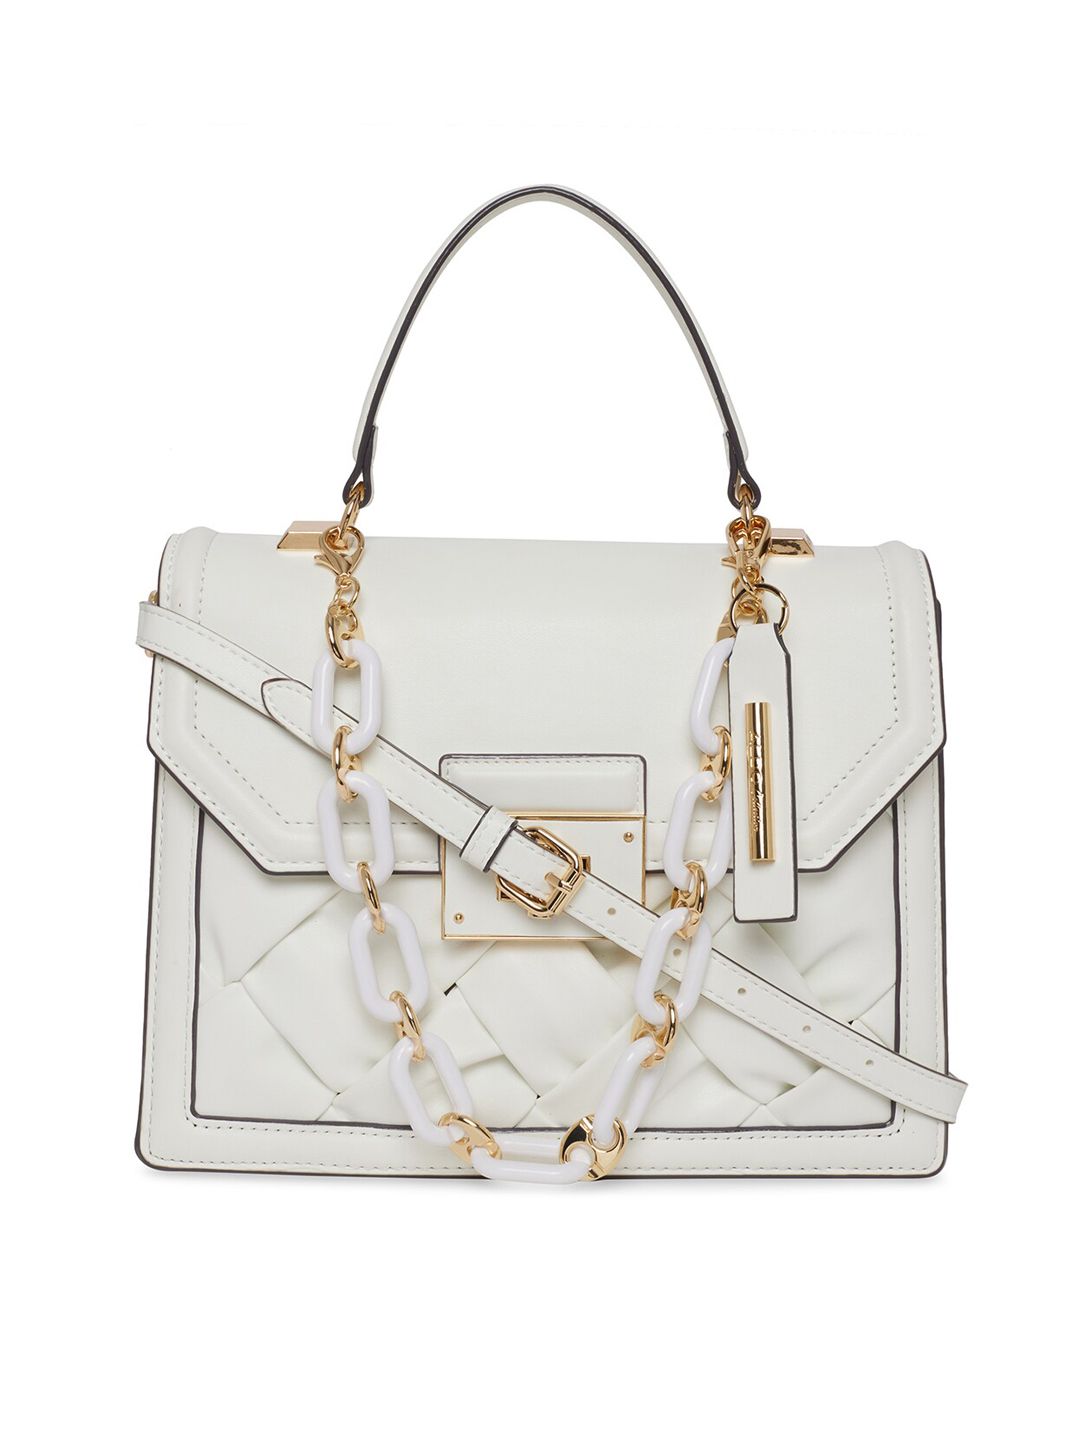 ALDO White Structured Satchel with Quilted Price in India